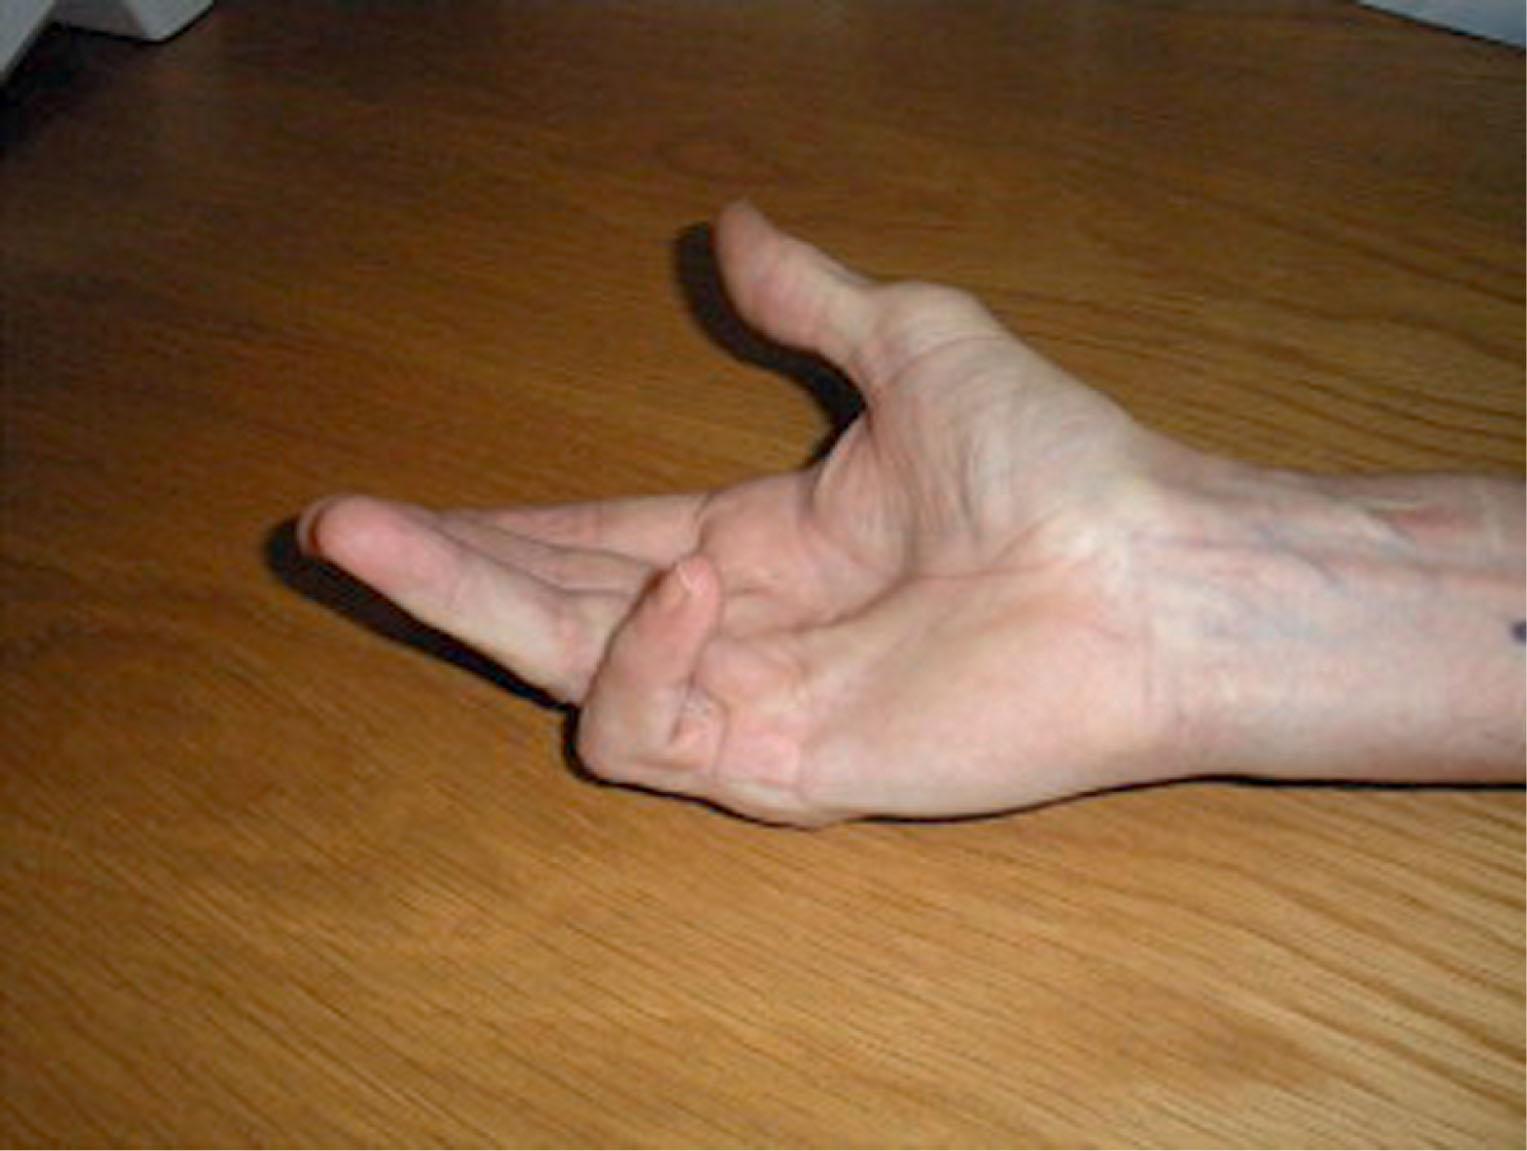 Fig. 12.1, This clinical photograph demonstrates the classic presentation of Dupuytren disease. The ulnar fingers show flexion contractures.